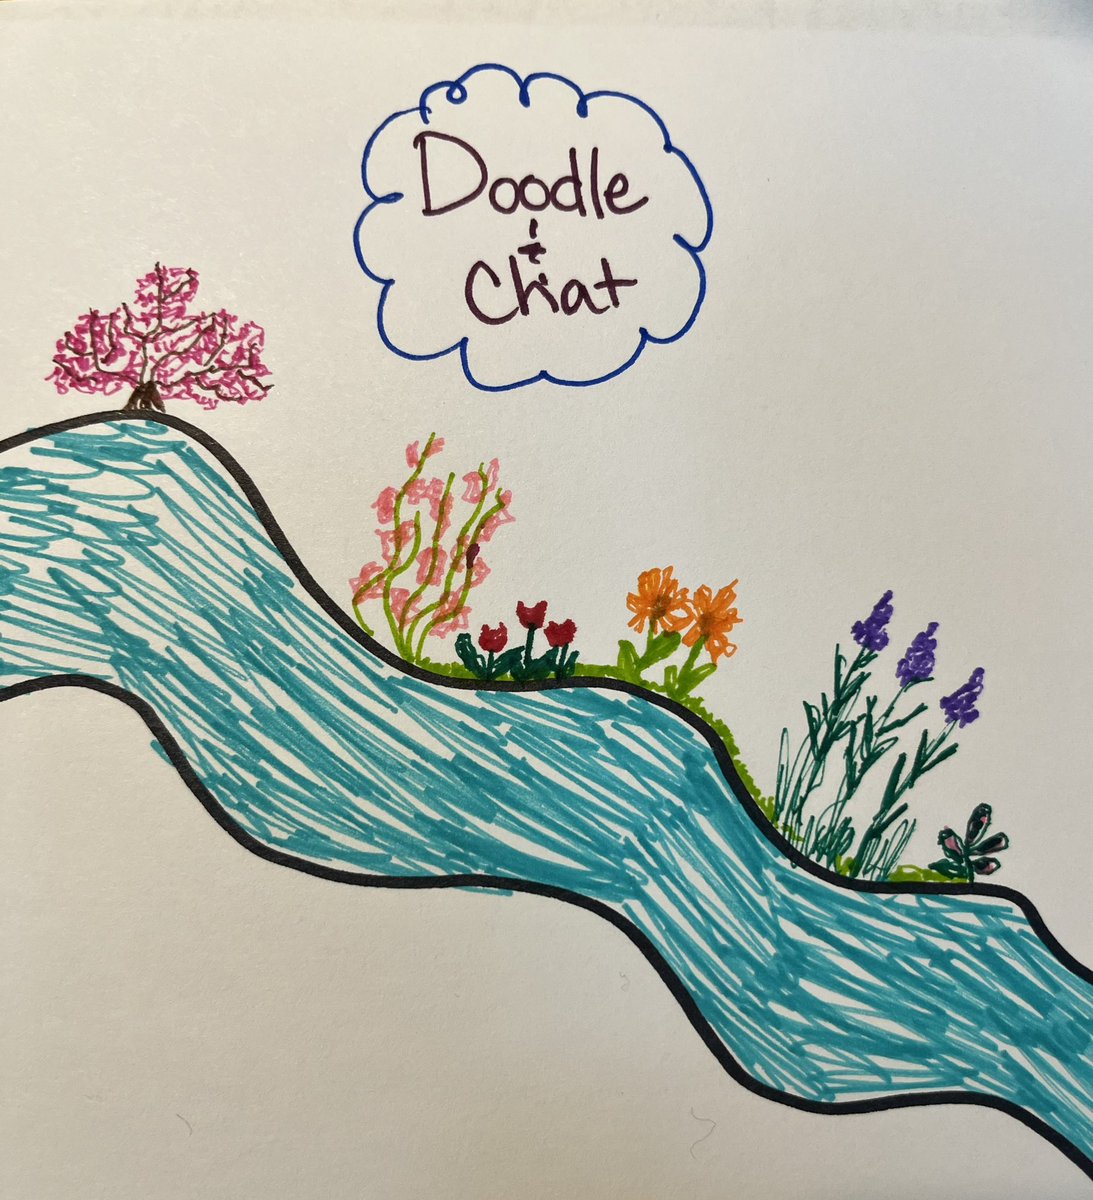 I had the best time talking gifted education, creativity & diverse learners while doodling with @carrie_baughcum & @MandiTolenEDU #doodleandchat Such fun!